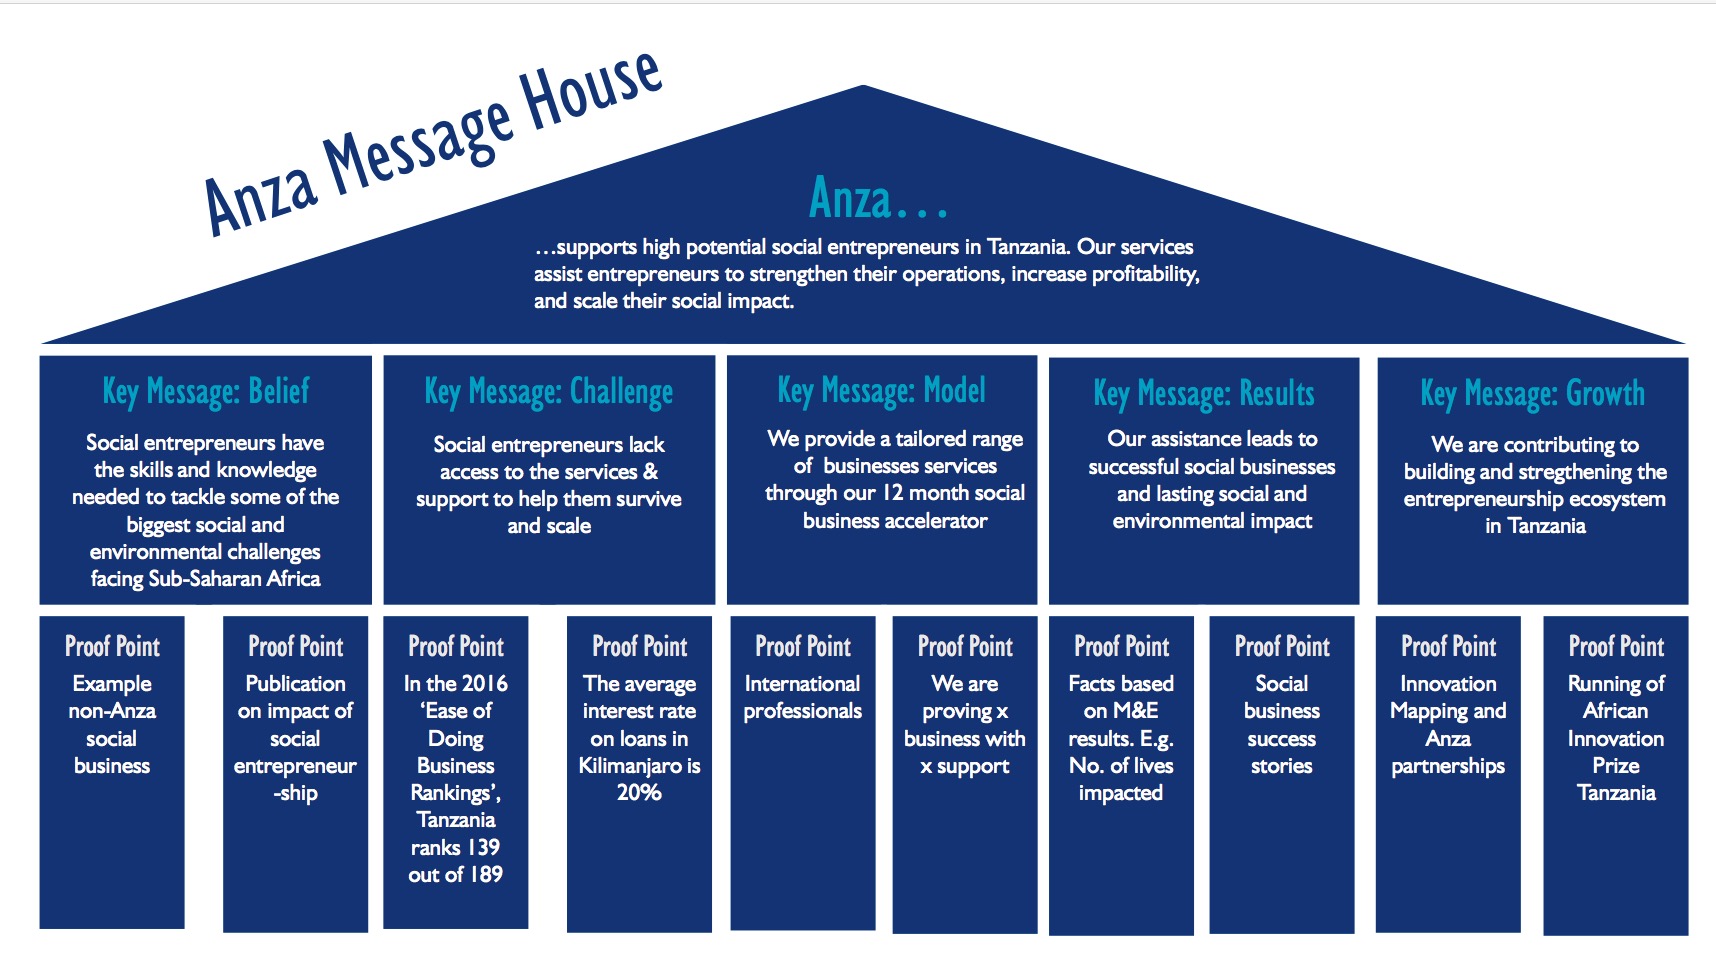 Anza Message House 